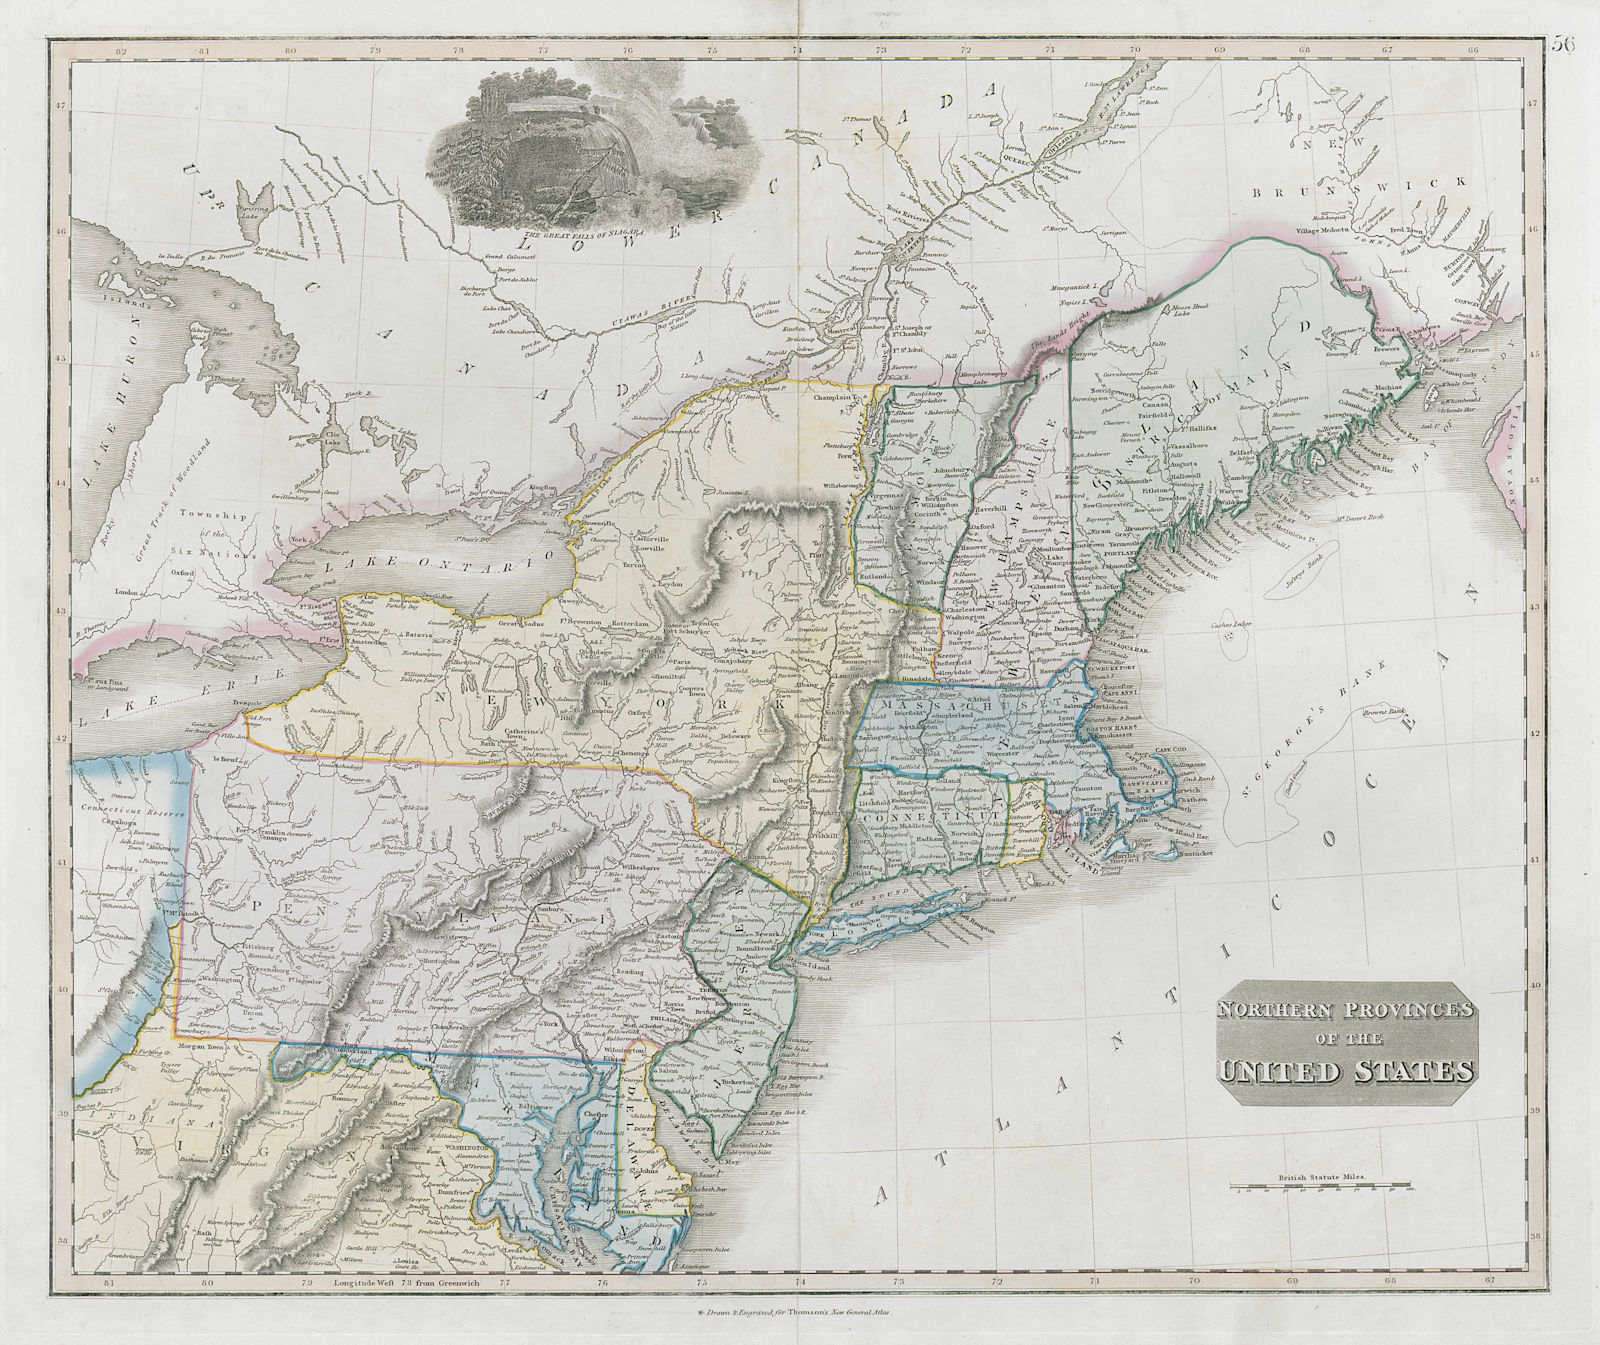 "Northern provinces of the United States". THOMSON. District of Main[e] 1830 map